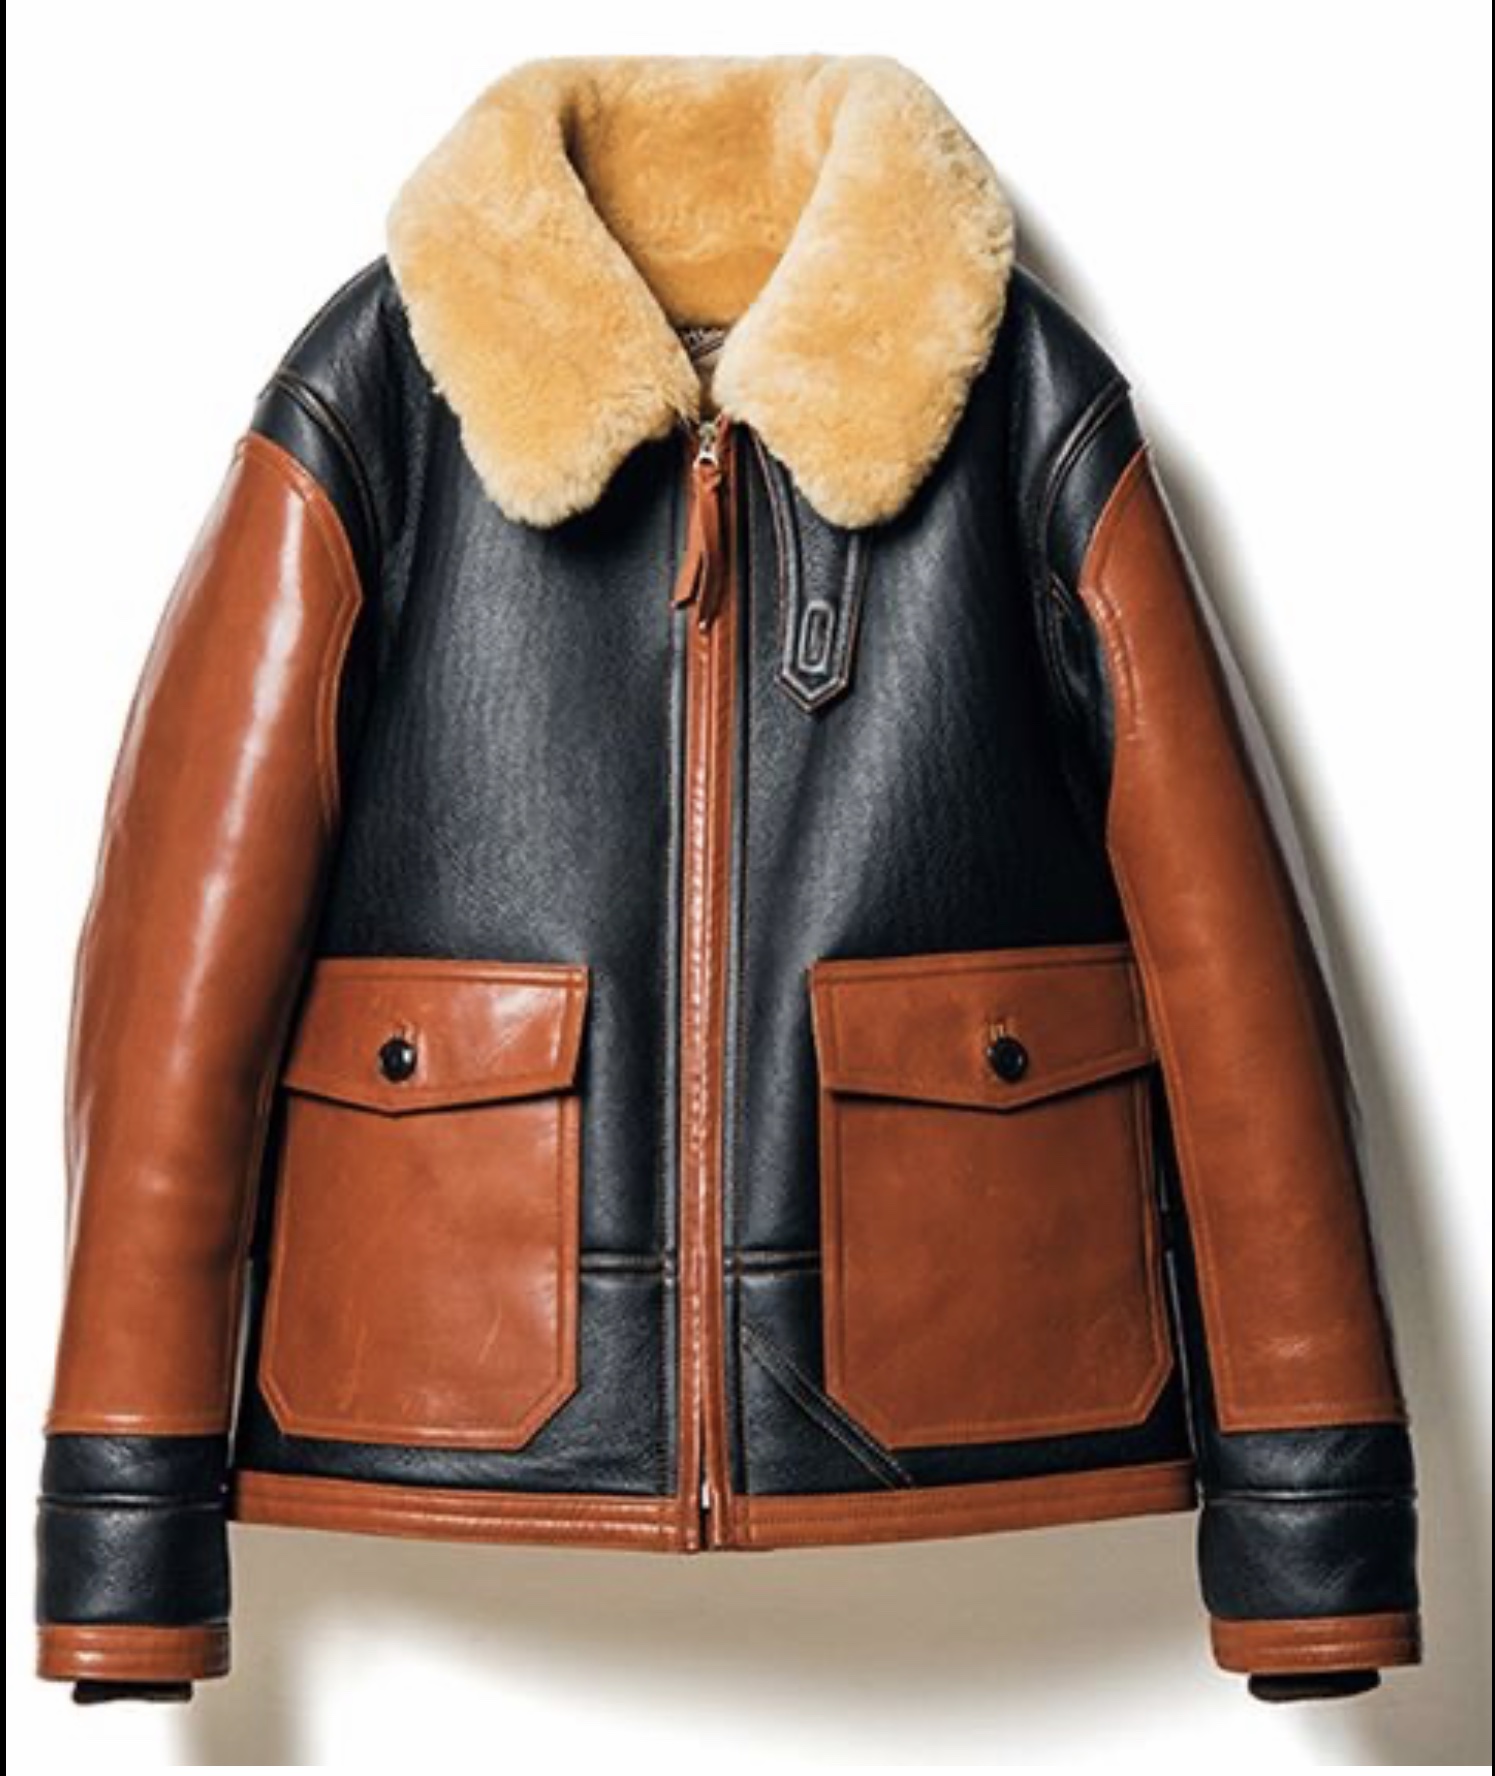 This is a nice looking m-445a style jacket | Vintage Leather Jackets Forum